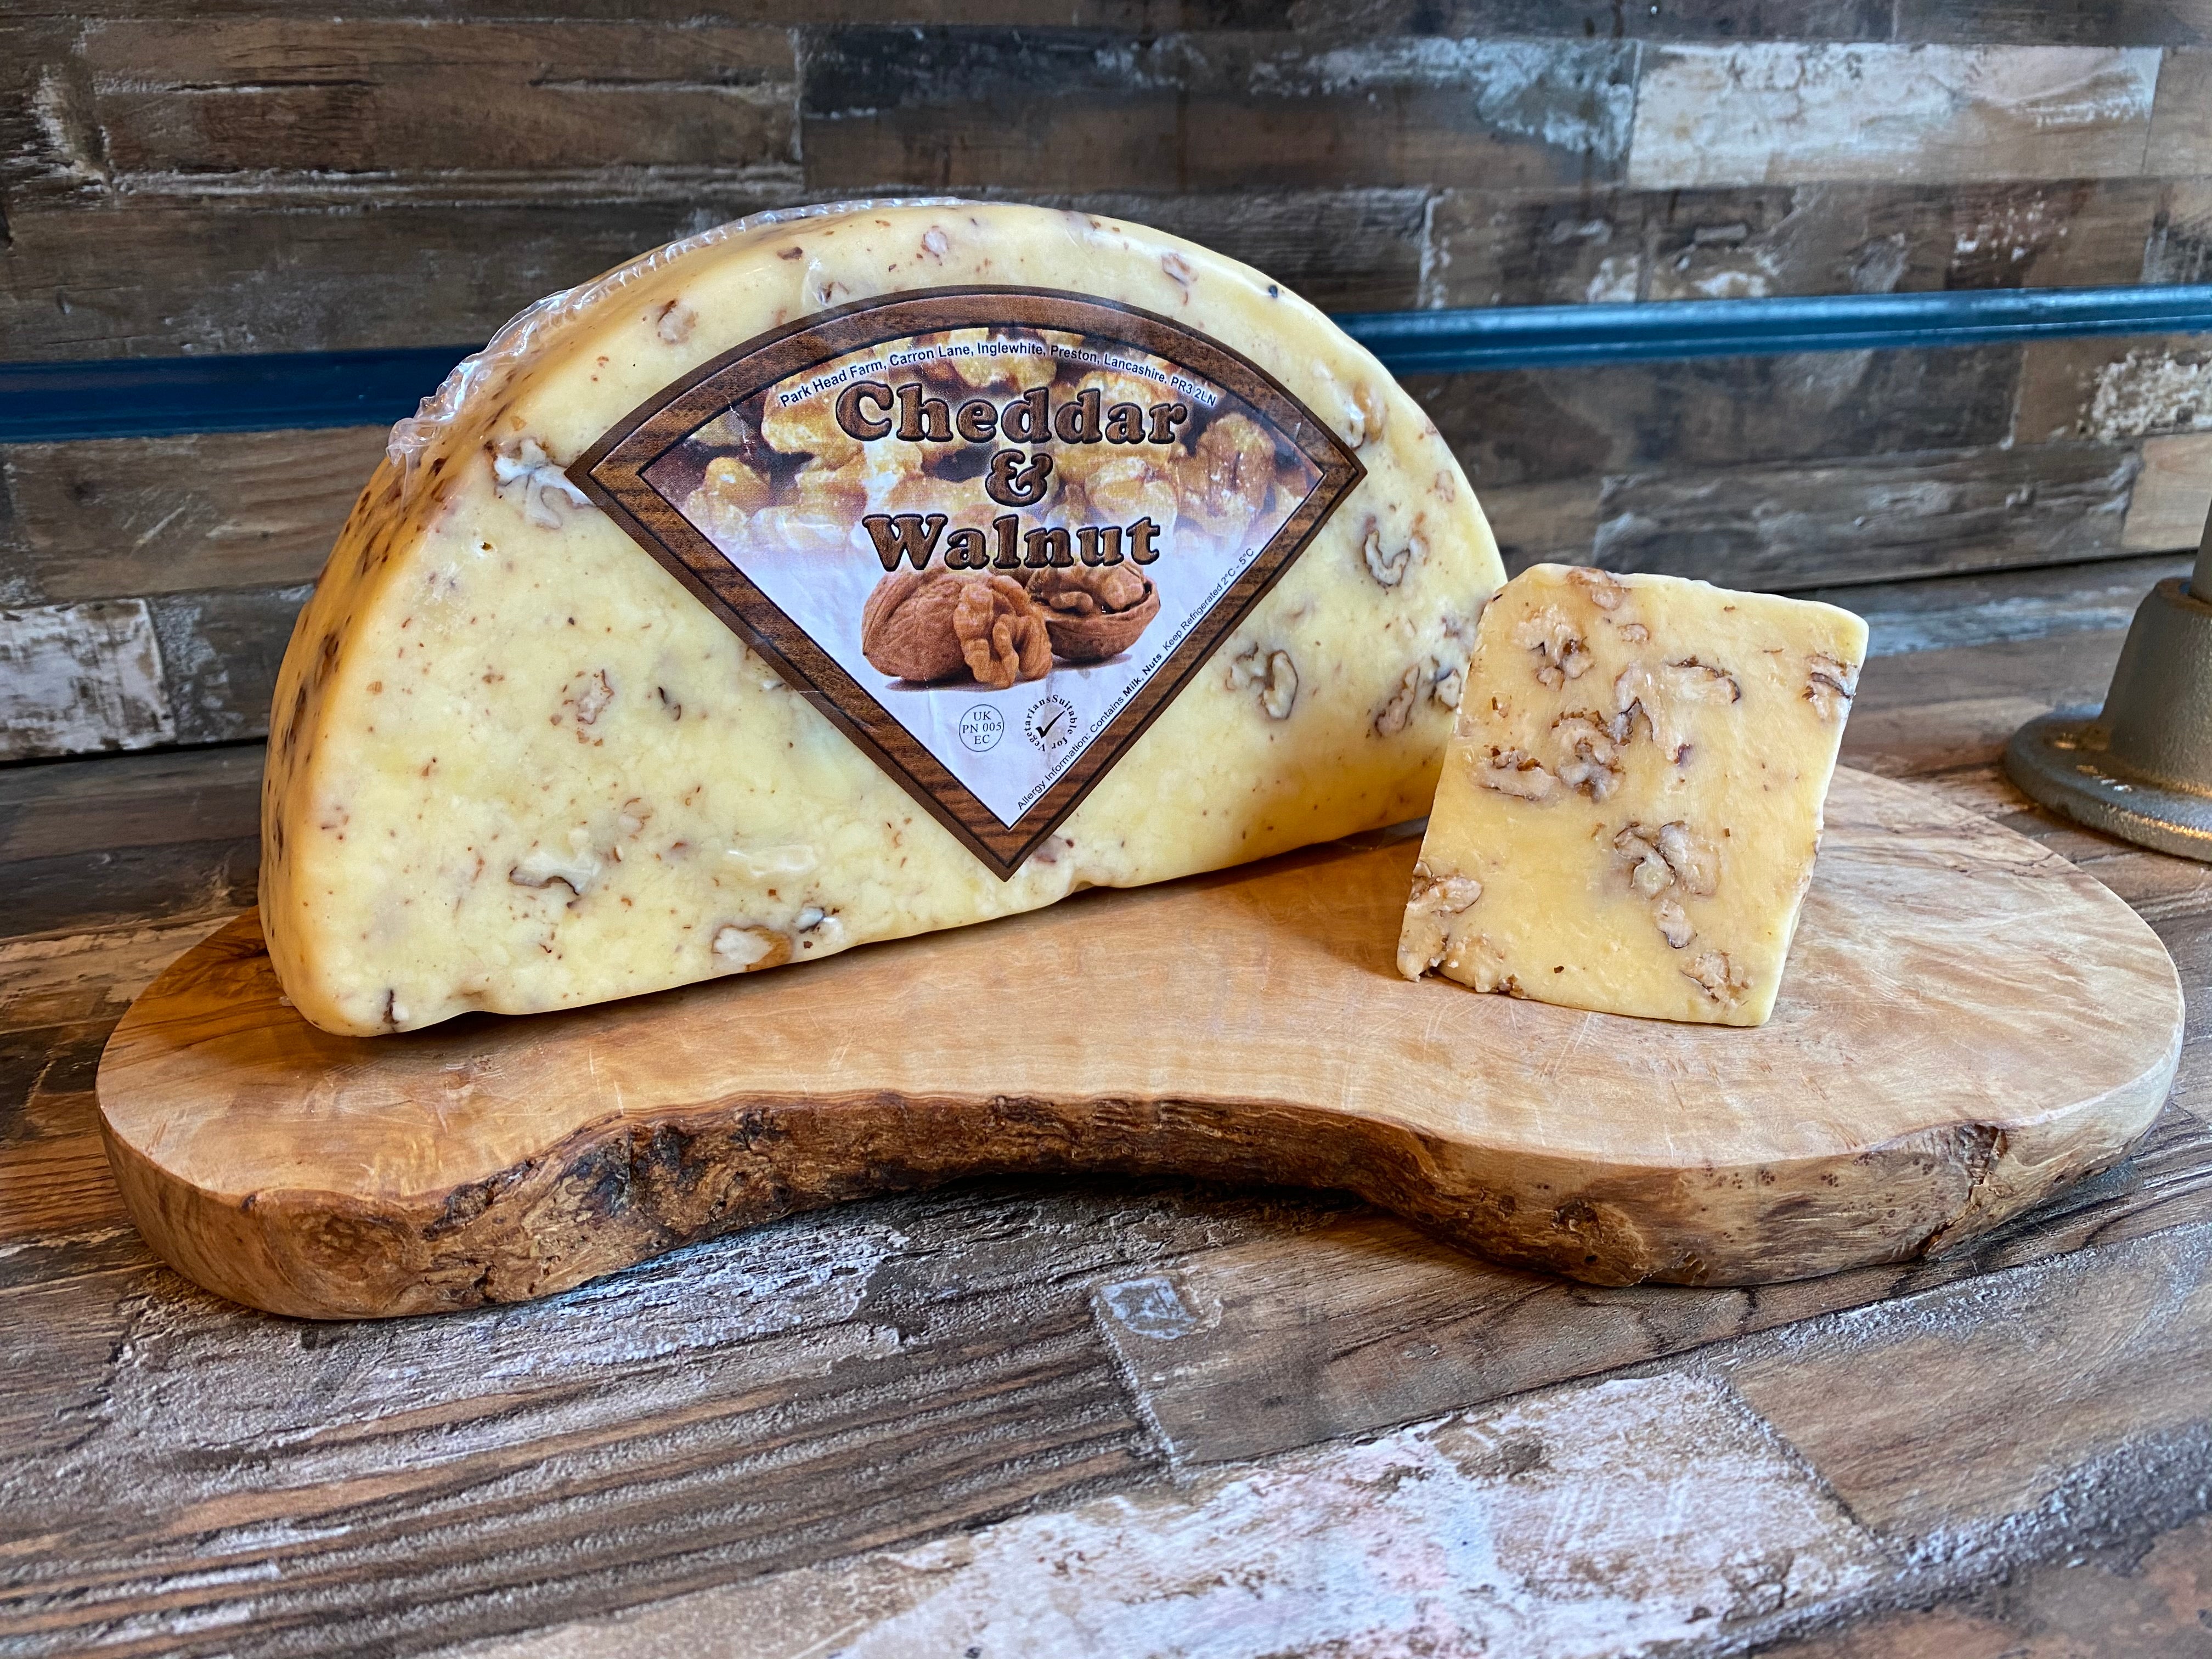 Mature Cheddar with Walnuts